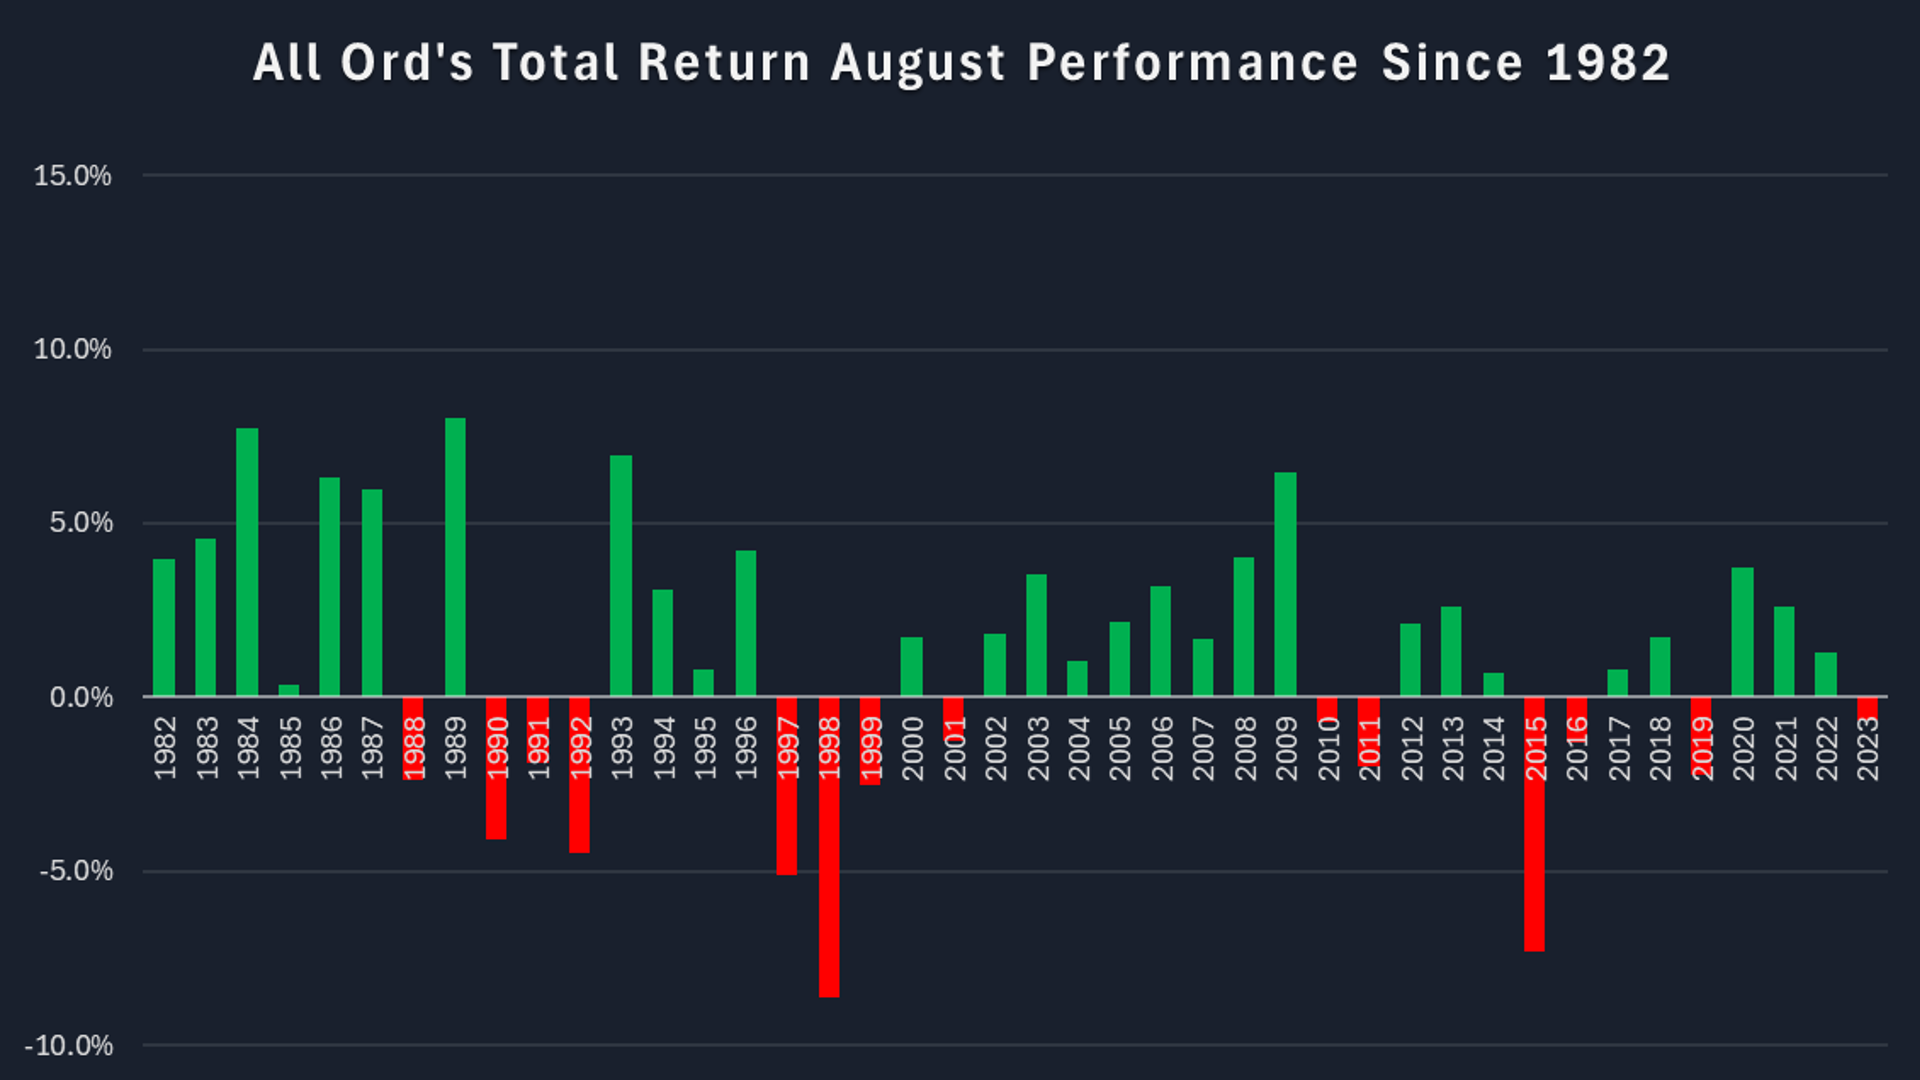 All Ord’s Total Return August Performance Since 1982 Years. Source: Me!